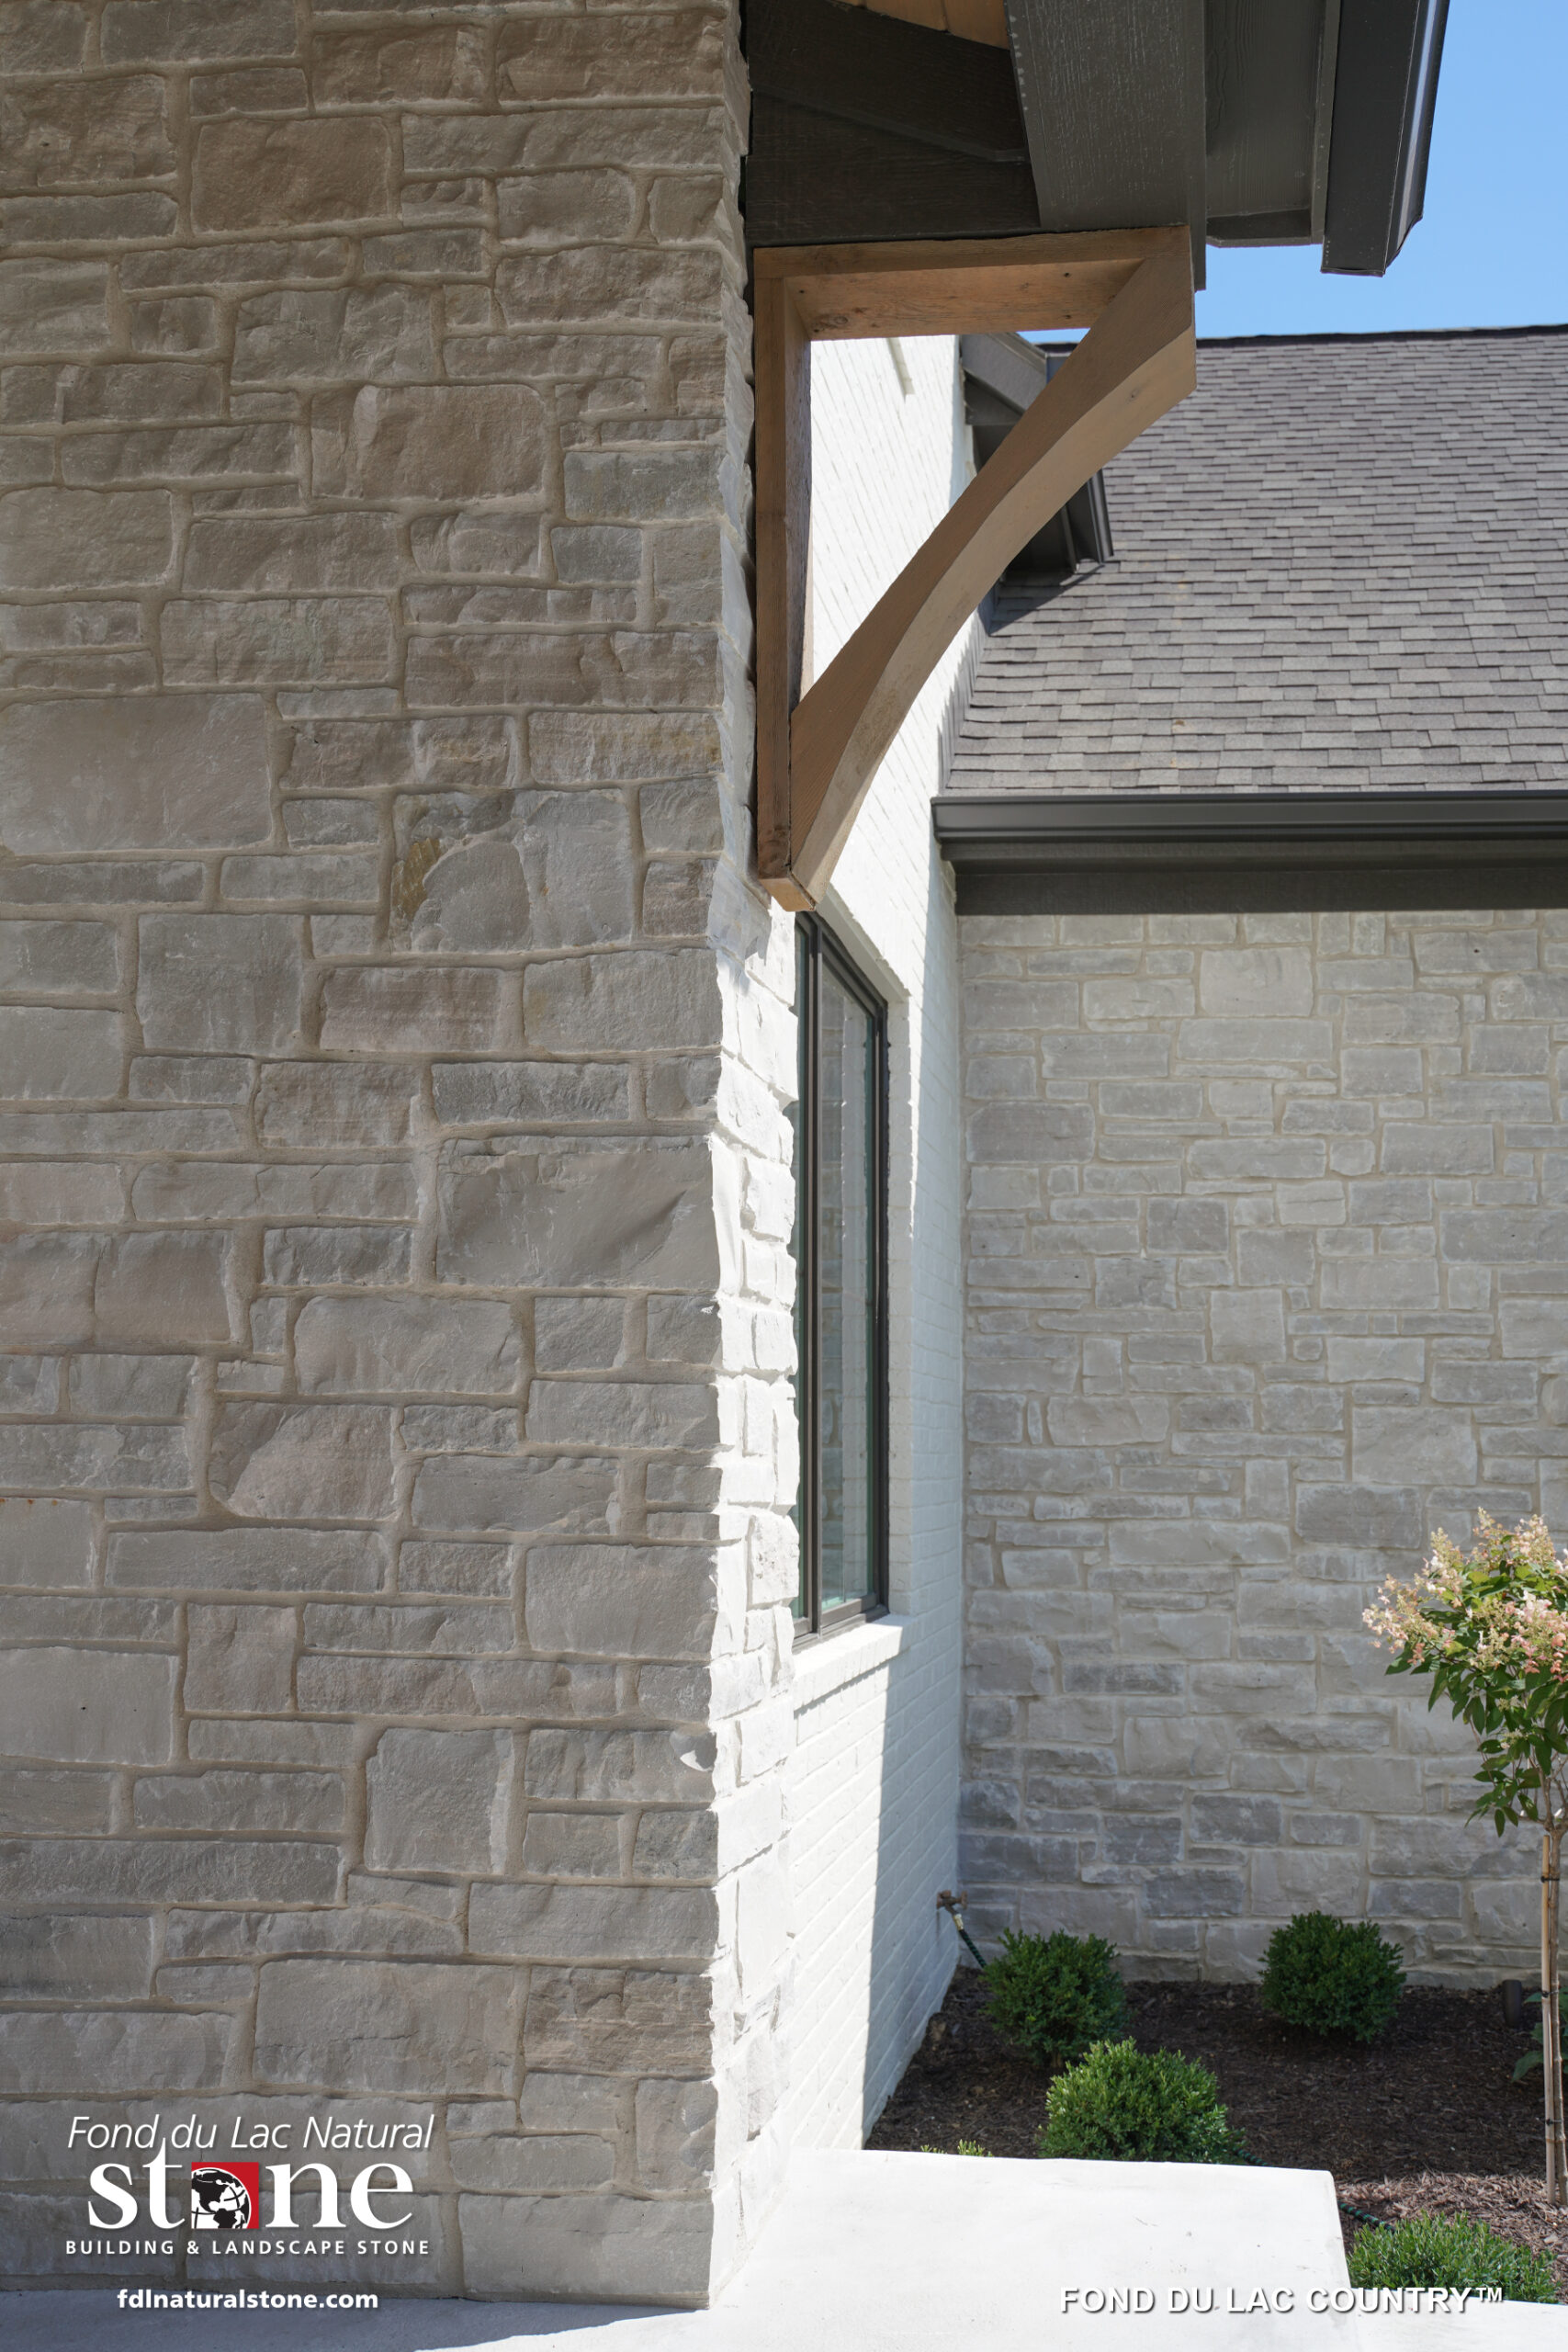 Fond du Lac Country - Residential Exterior 3 - Fond du Lac Natural Stone